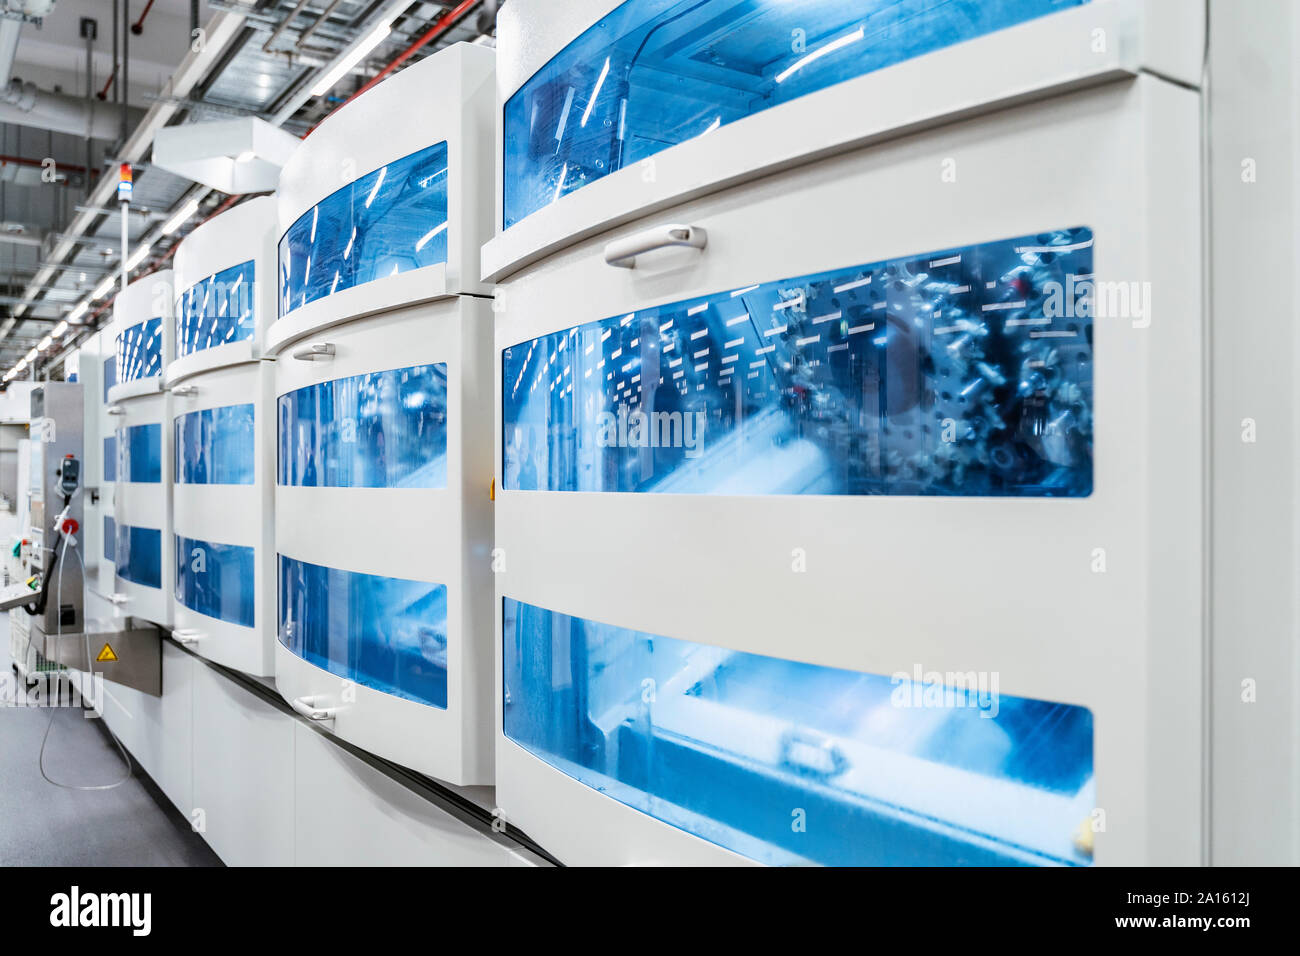 Industrial machinery with blue transparent panels, Stuttgart, Germany Stock Photo